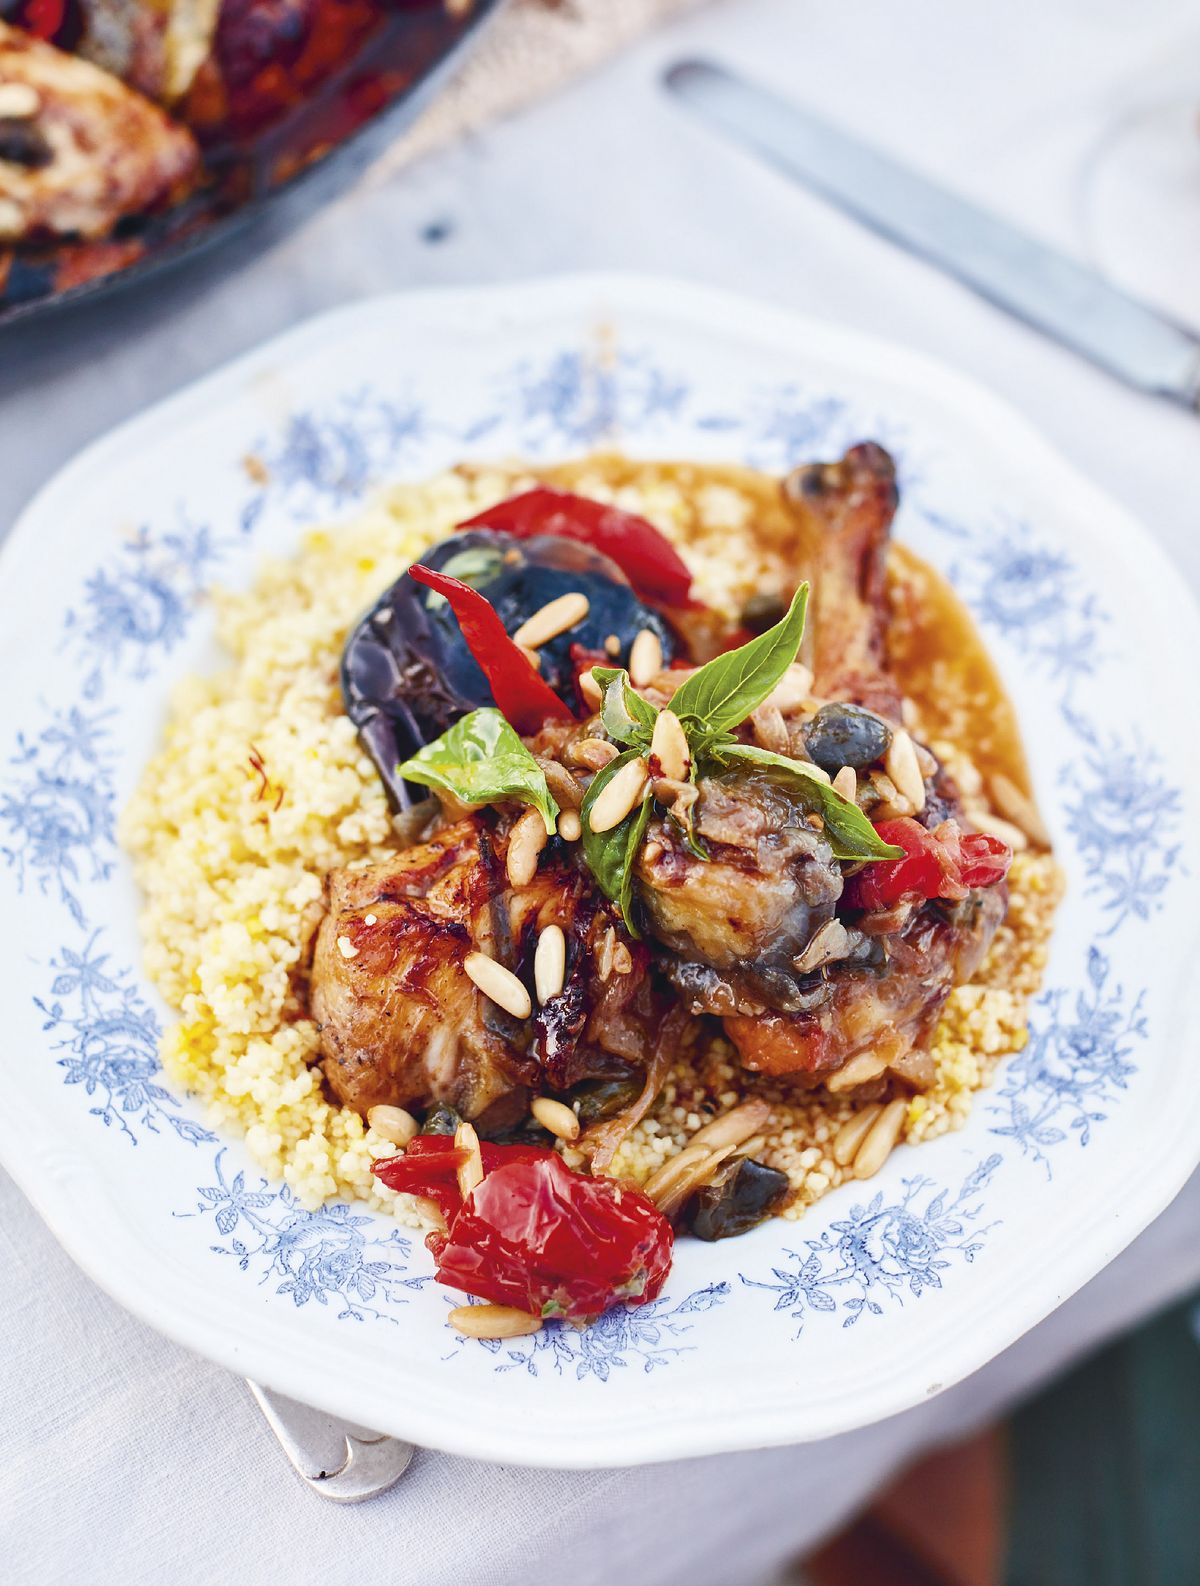 Jamie Oliver’s Salina Chicken: Beautiful, scented soft aubergines and tomatoes with capers